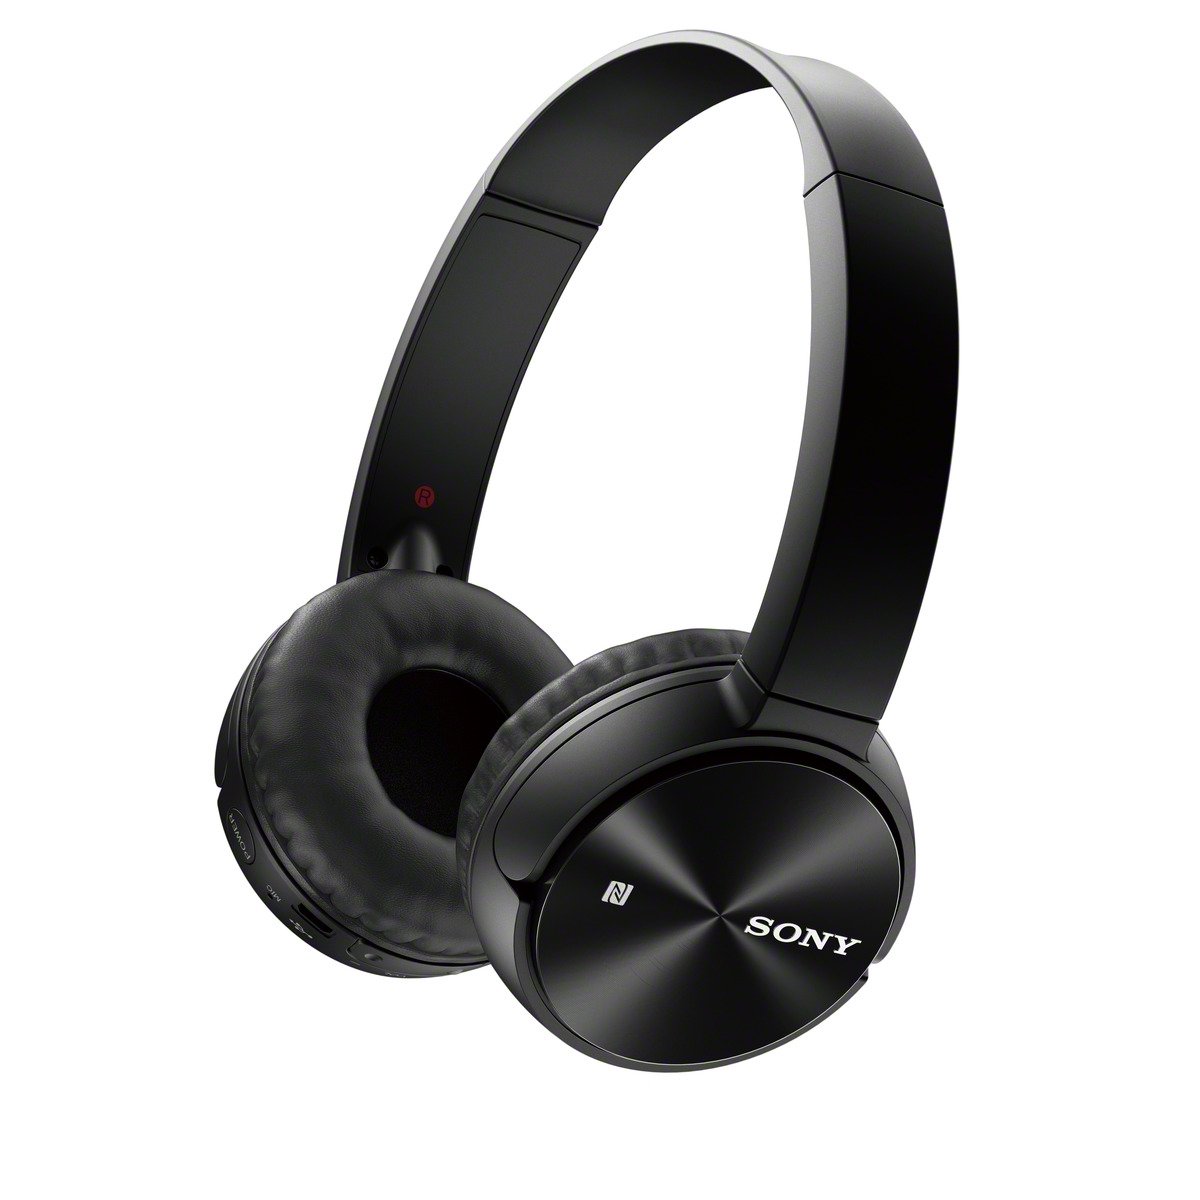 size with mic - - MDR-ZX310AP 3.5 ZX Sony - full headphones - white - jack Series wired - mm